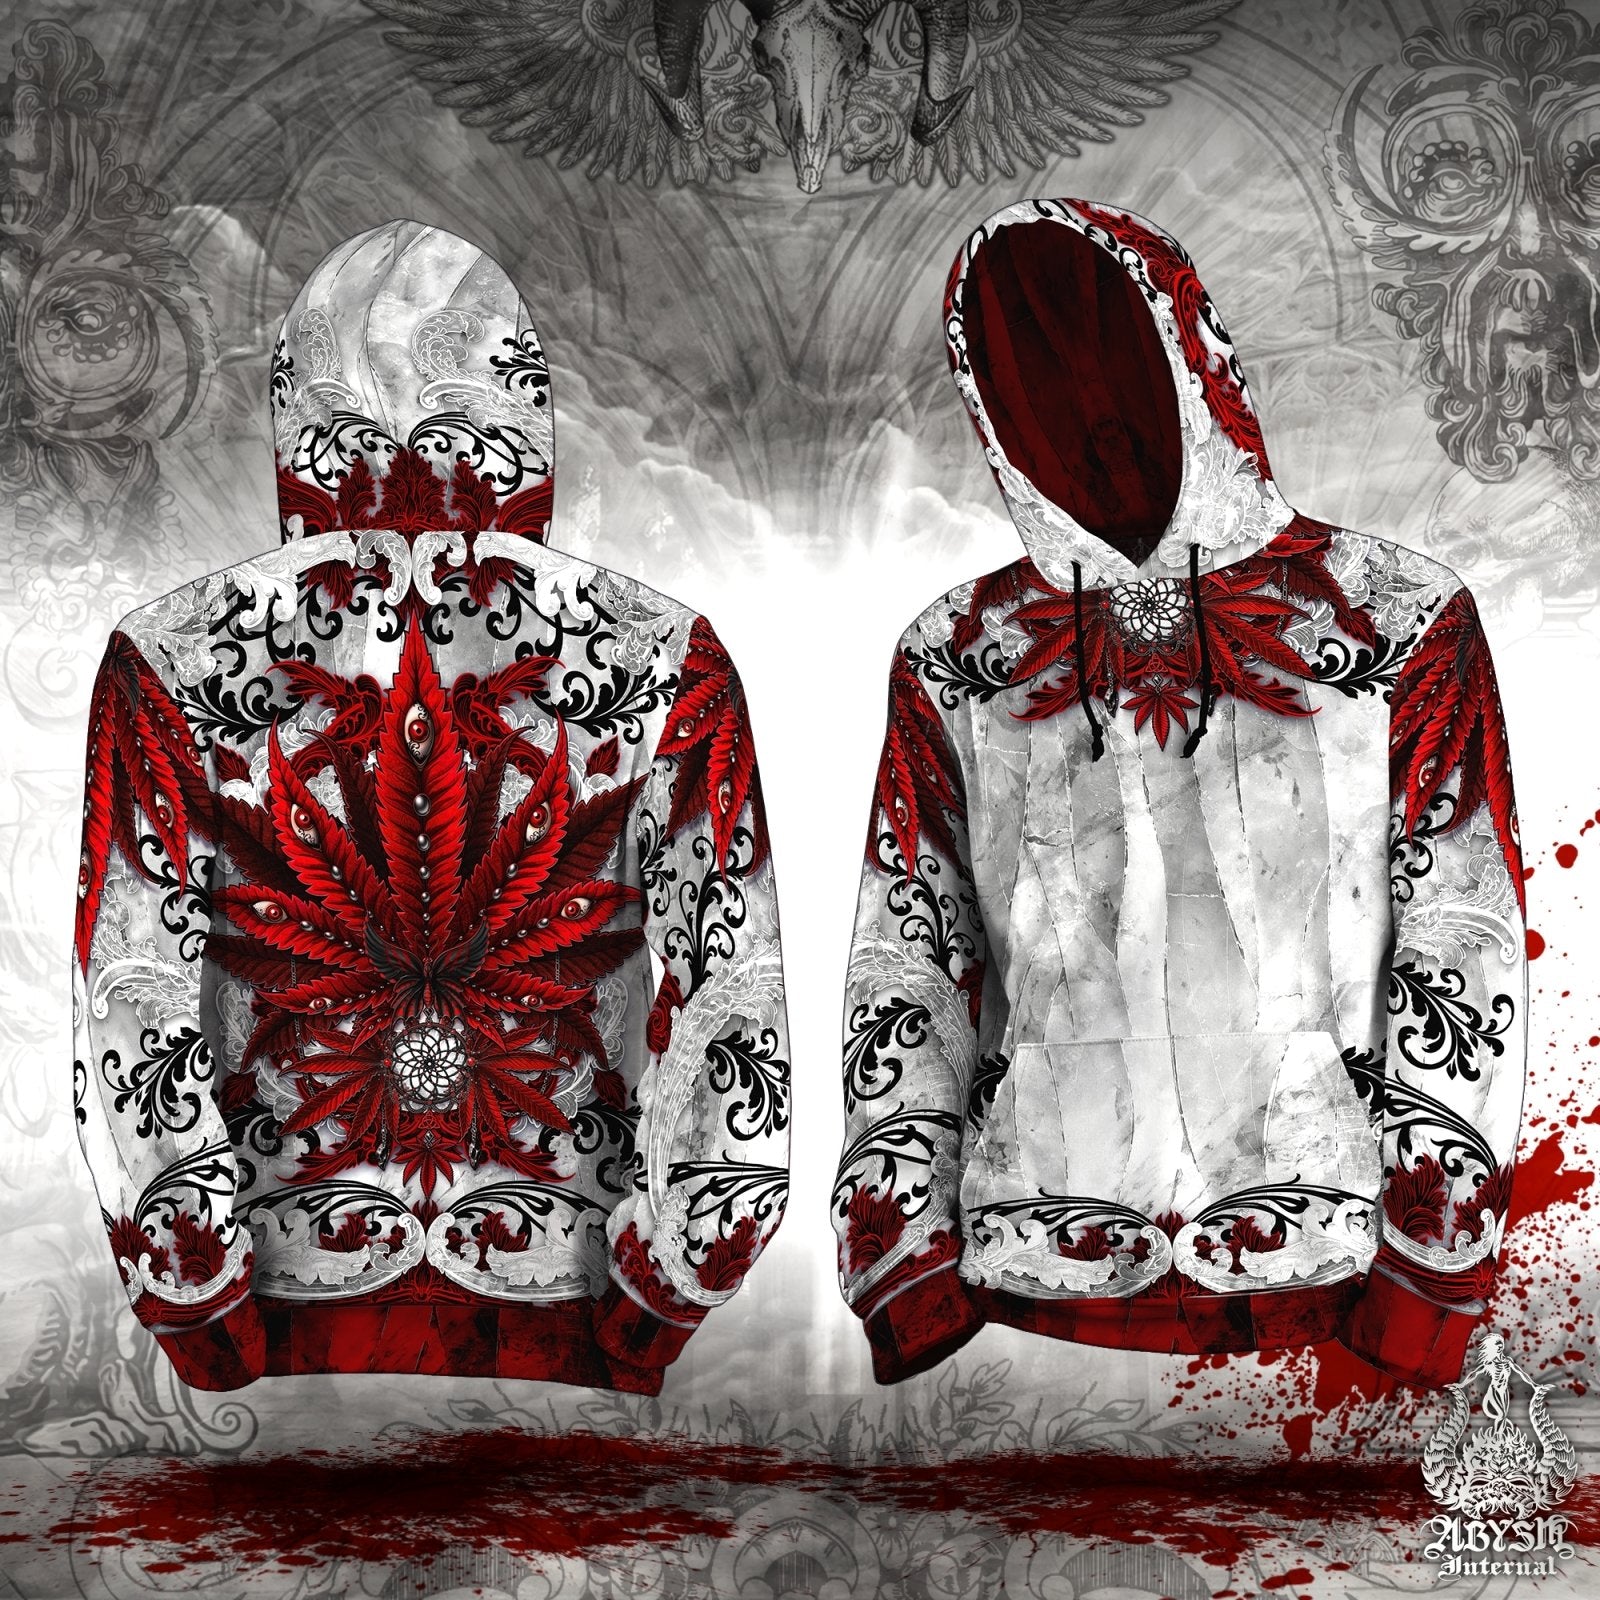 Cannabis Hoodie, Weed Clothes, Gothic Festival Outfit, White Goth Streetwear, Indie and Alternative Clothing, Unisex, 420 Gift - Bloody Red Marijuana - Abysm Internal